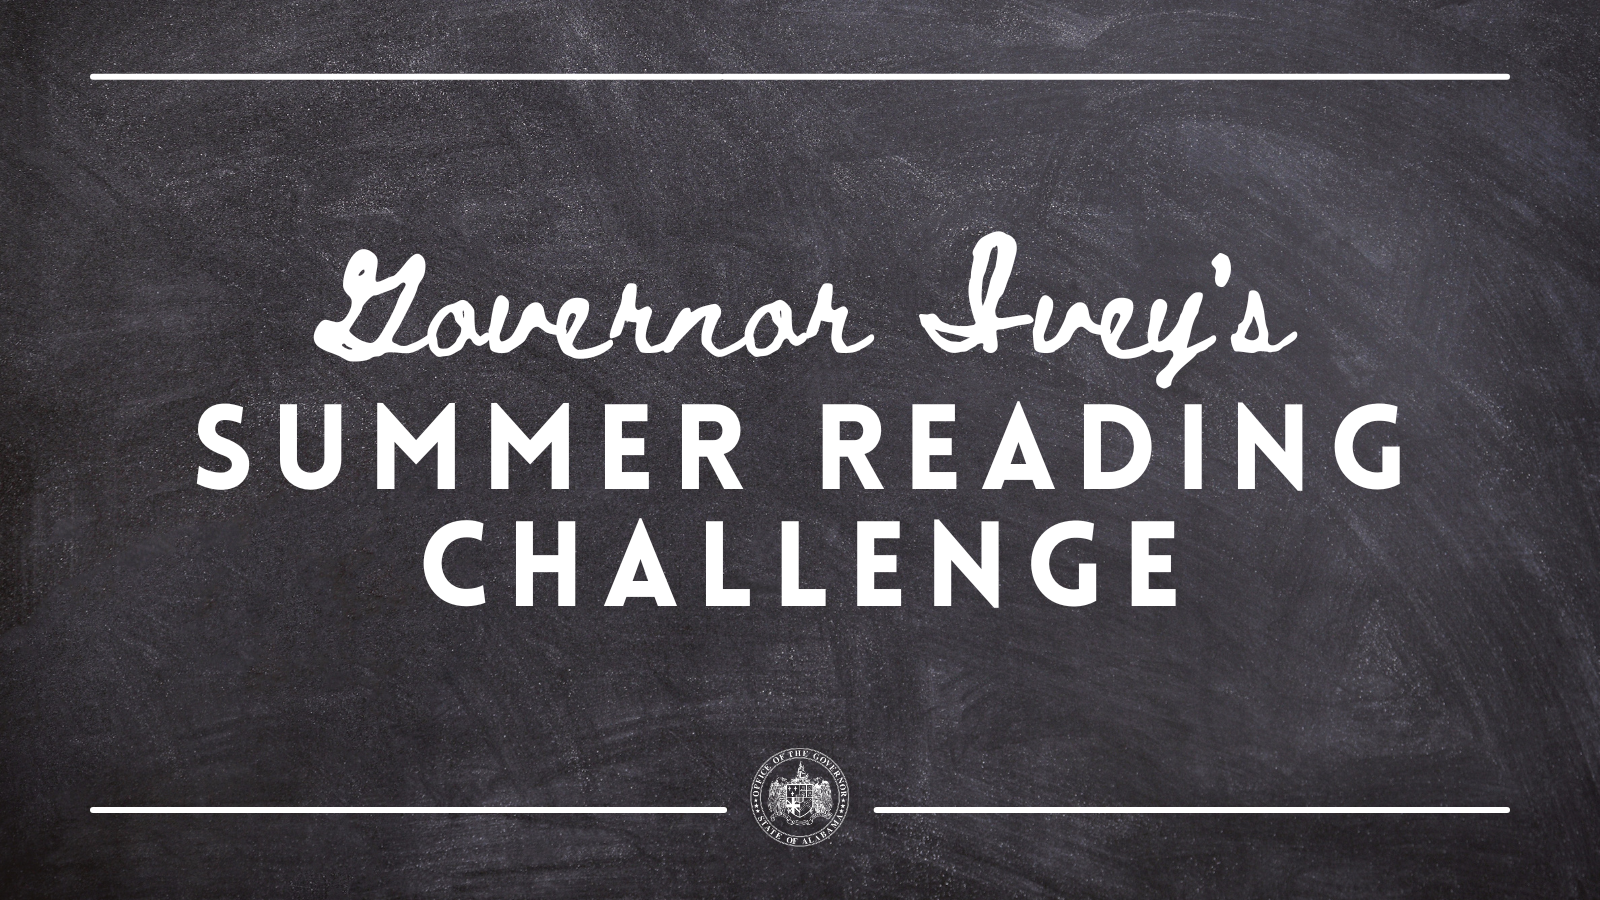 Governor Ivey Invites Alabama Students to Join for Her Summer Reading Challenge